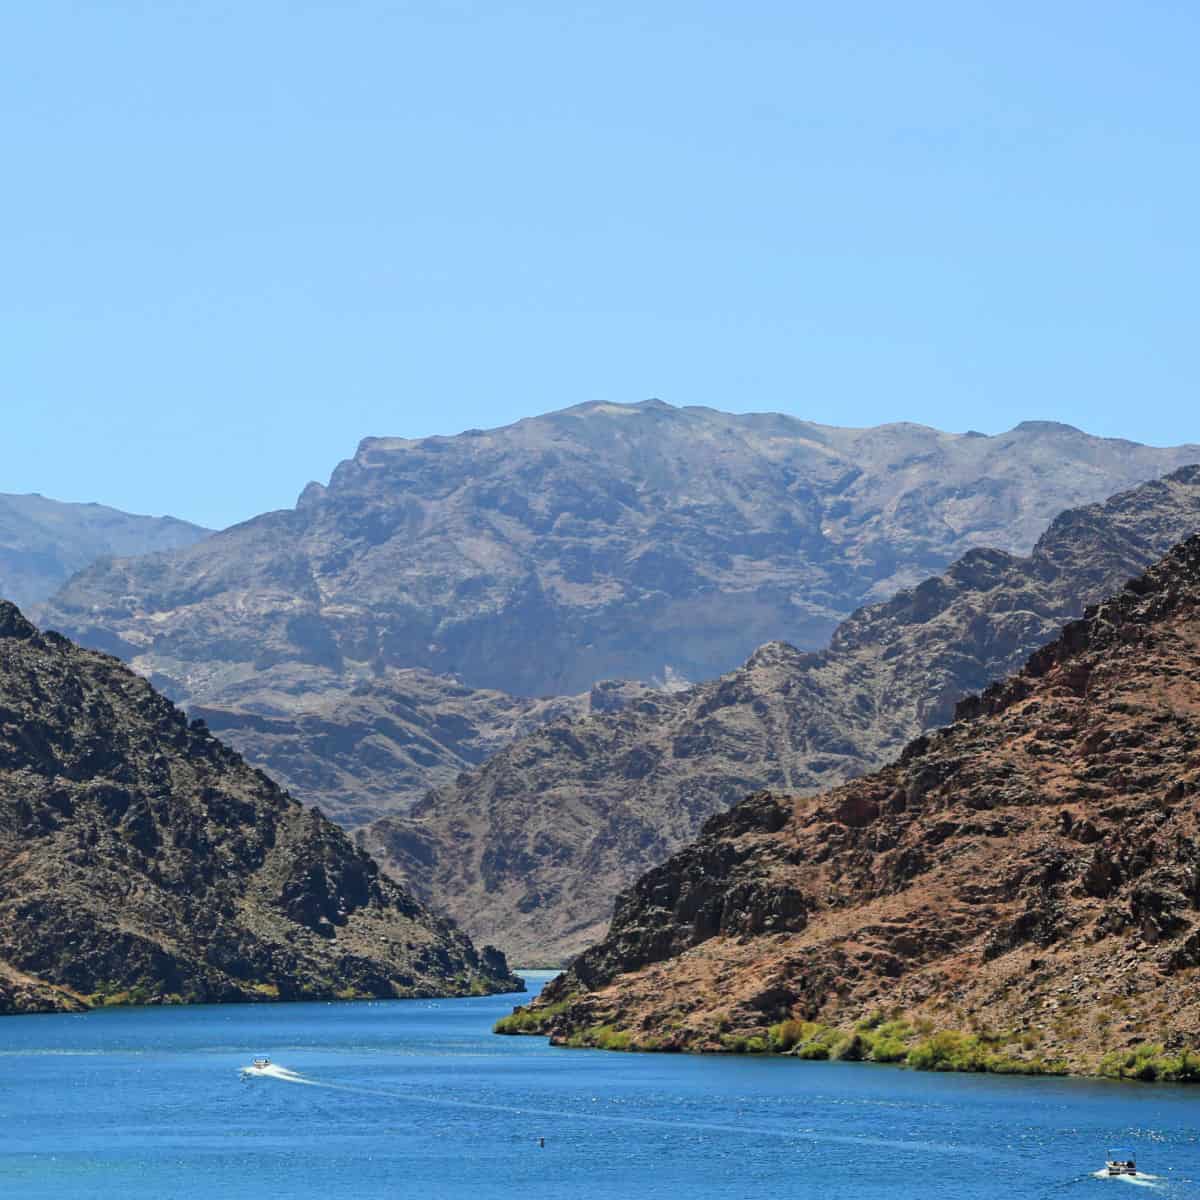 Boats taking off at the Willow Beach Area of Lake Mead National Recreation Area in Nevada National Parks